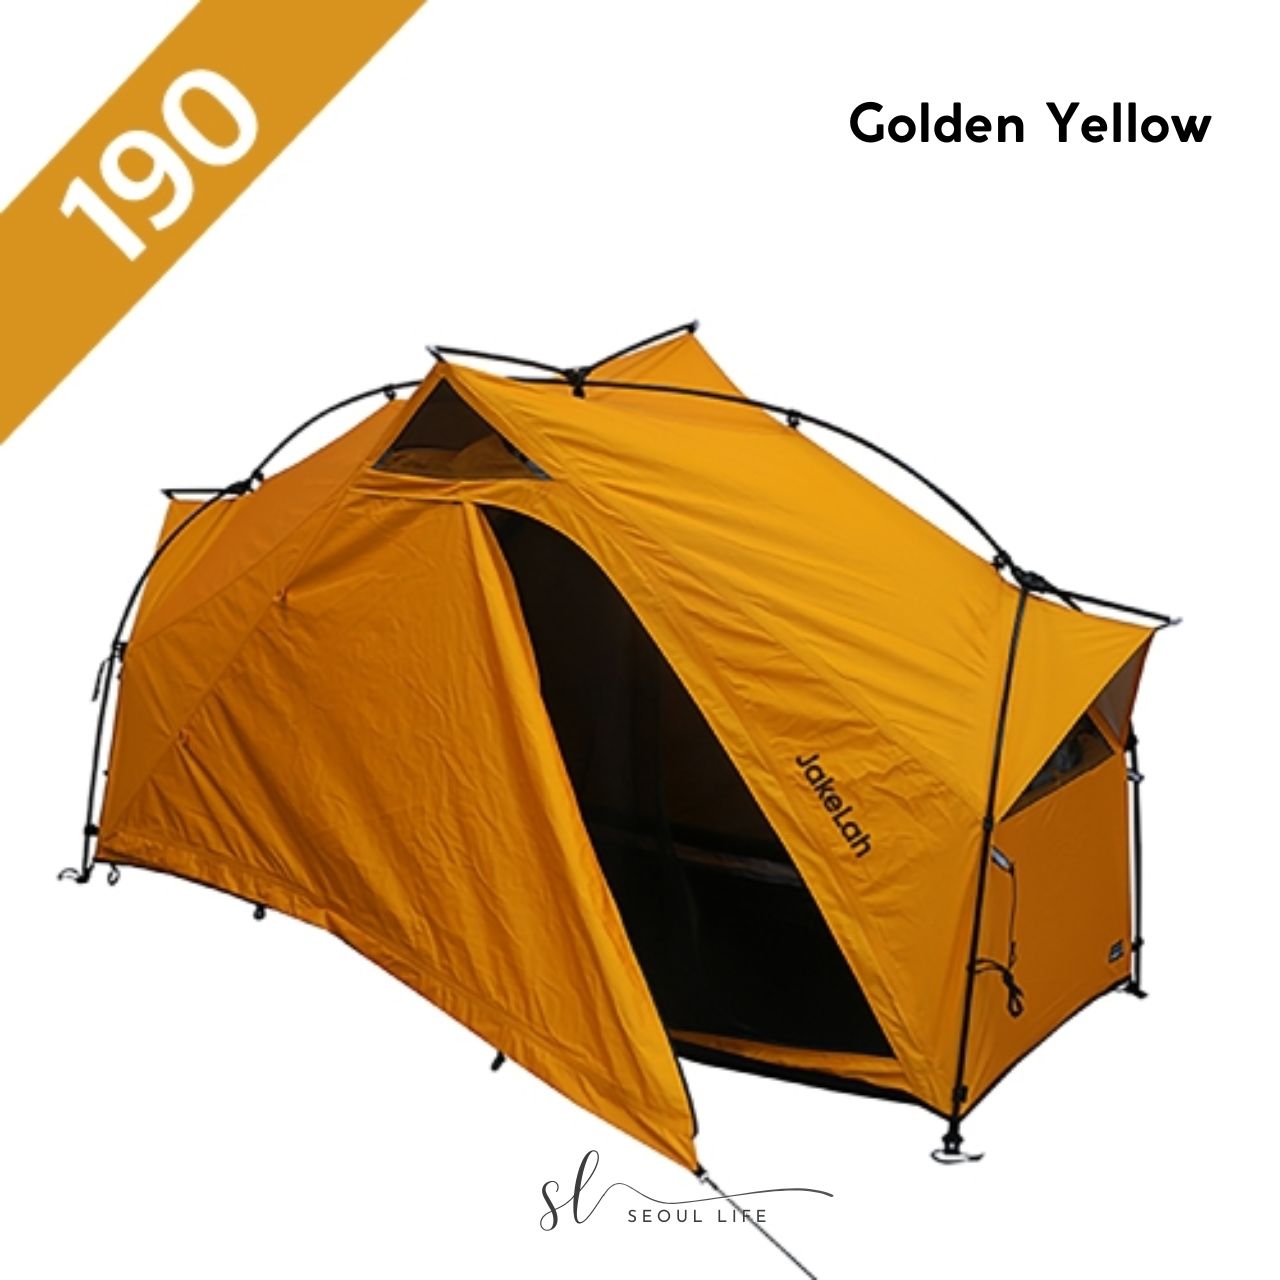 ]*JakeLah* J.cot 190 tent for one person/ Bike tent & easy carrying tent